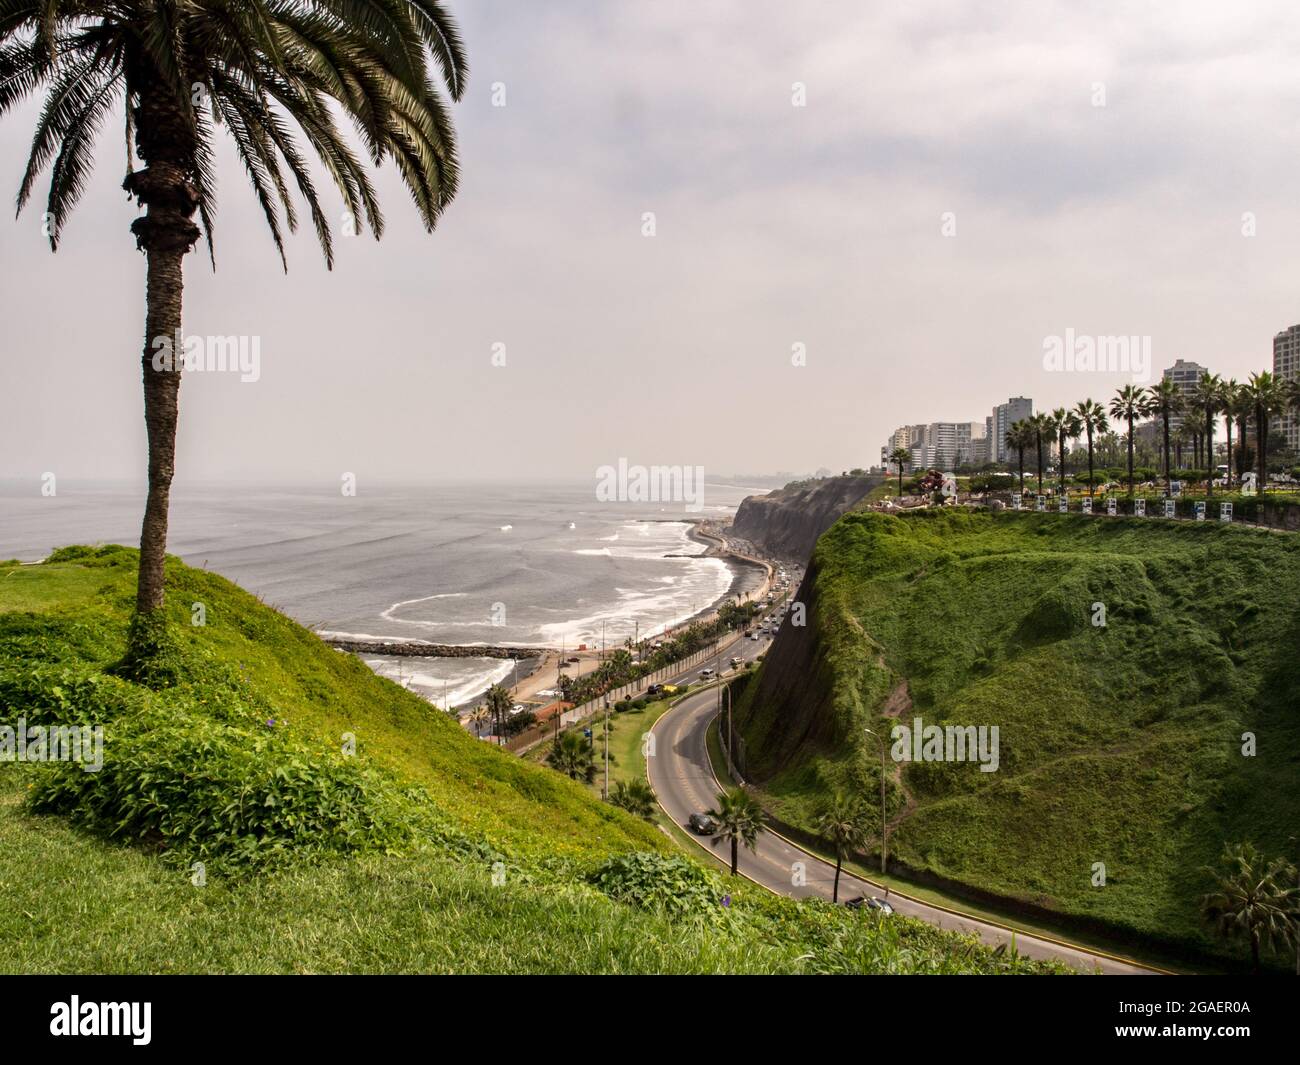 Lima, Peru - May 27, 2016: Beautiful view of Lima coastline from Miraflores district. South America Stock Photo